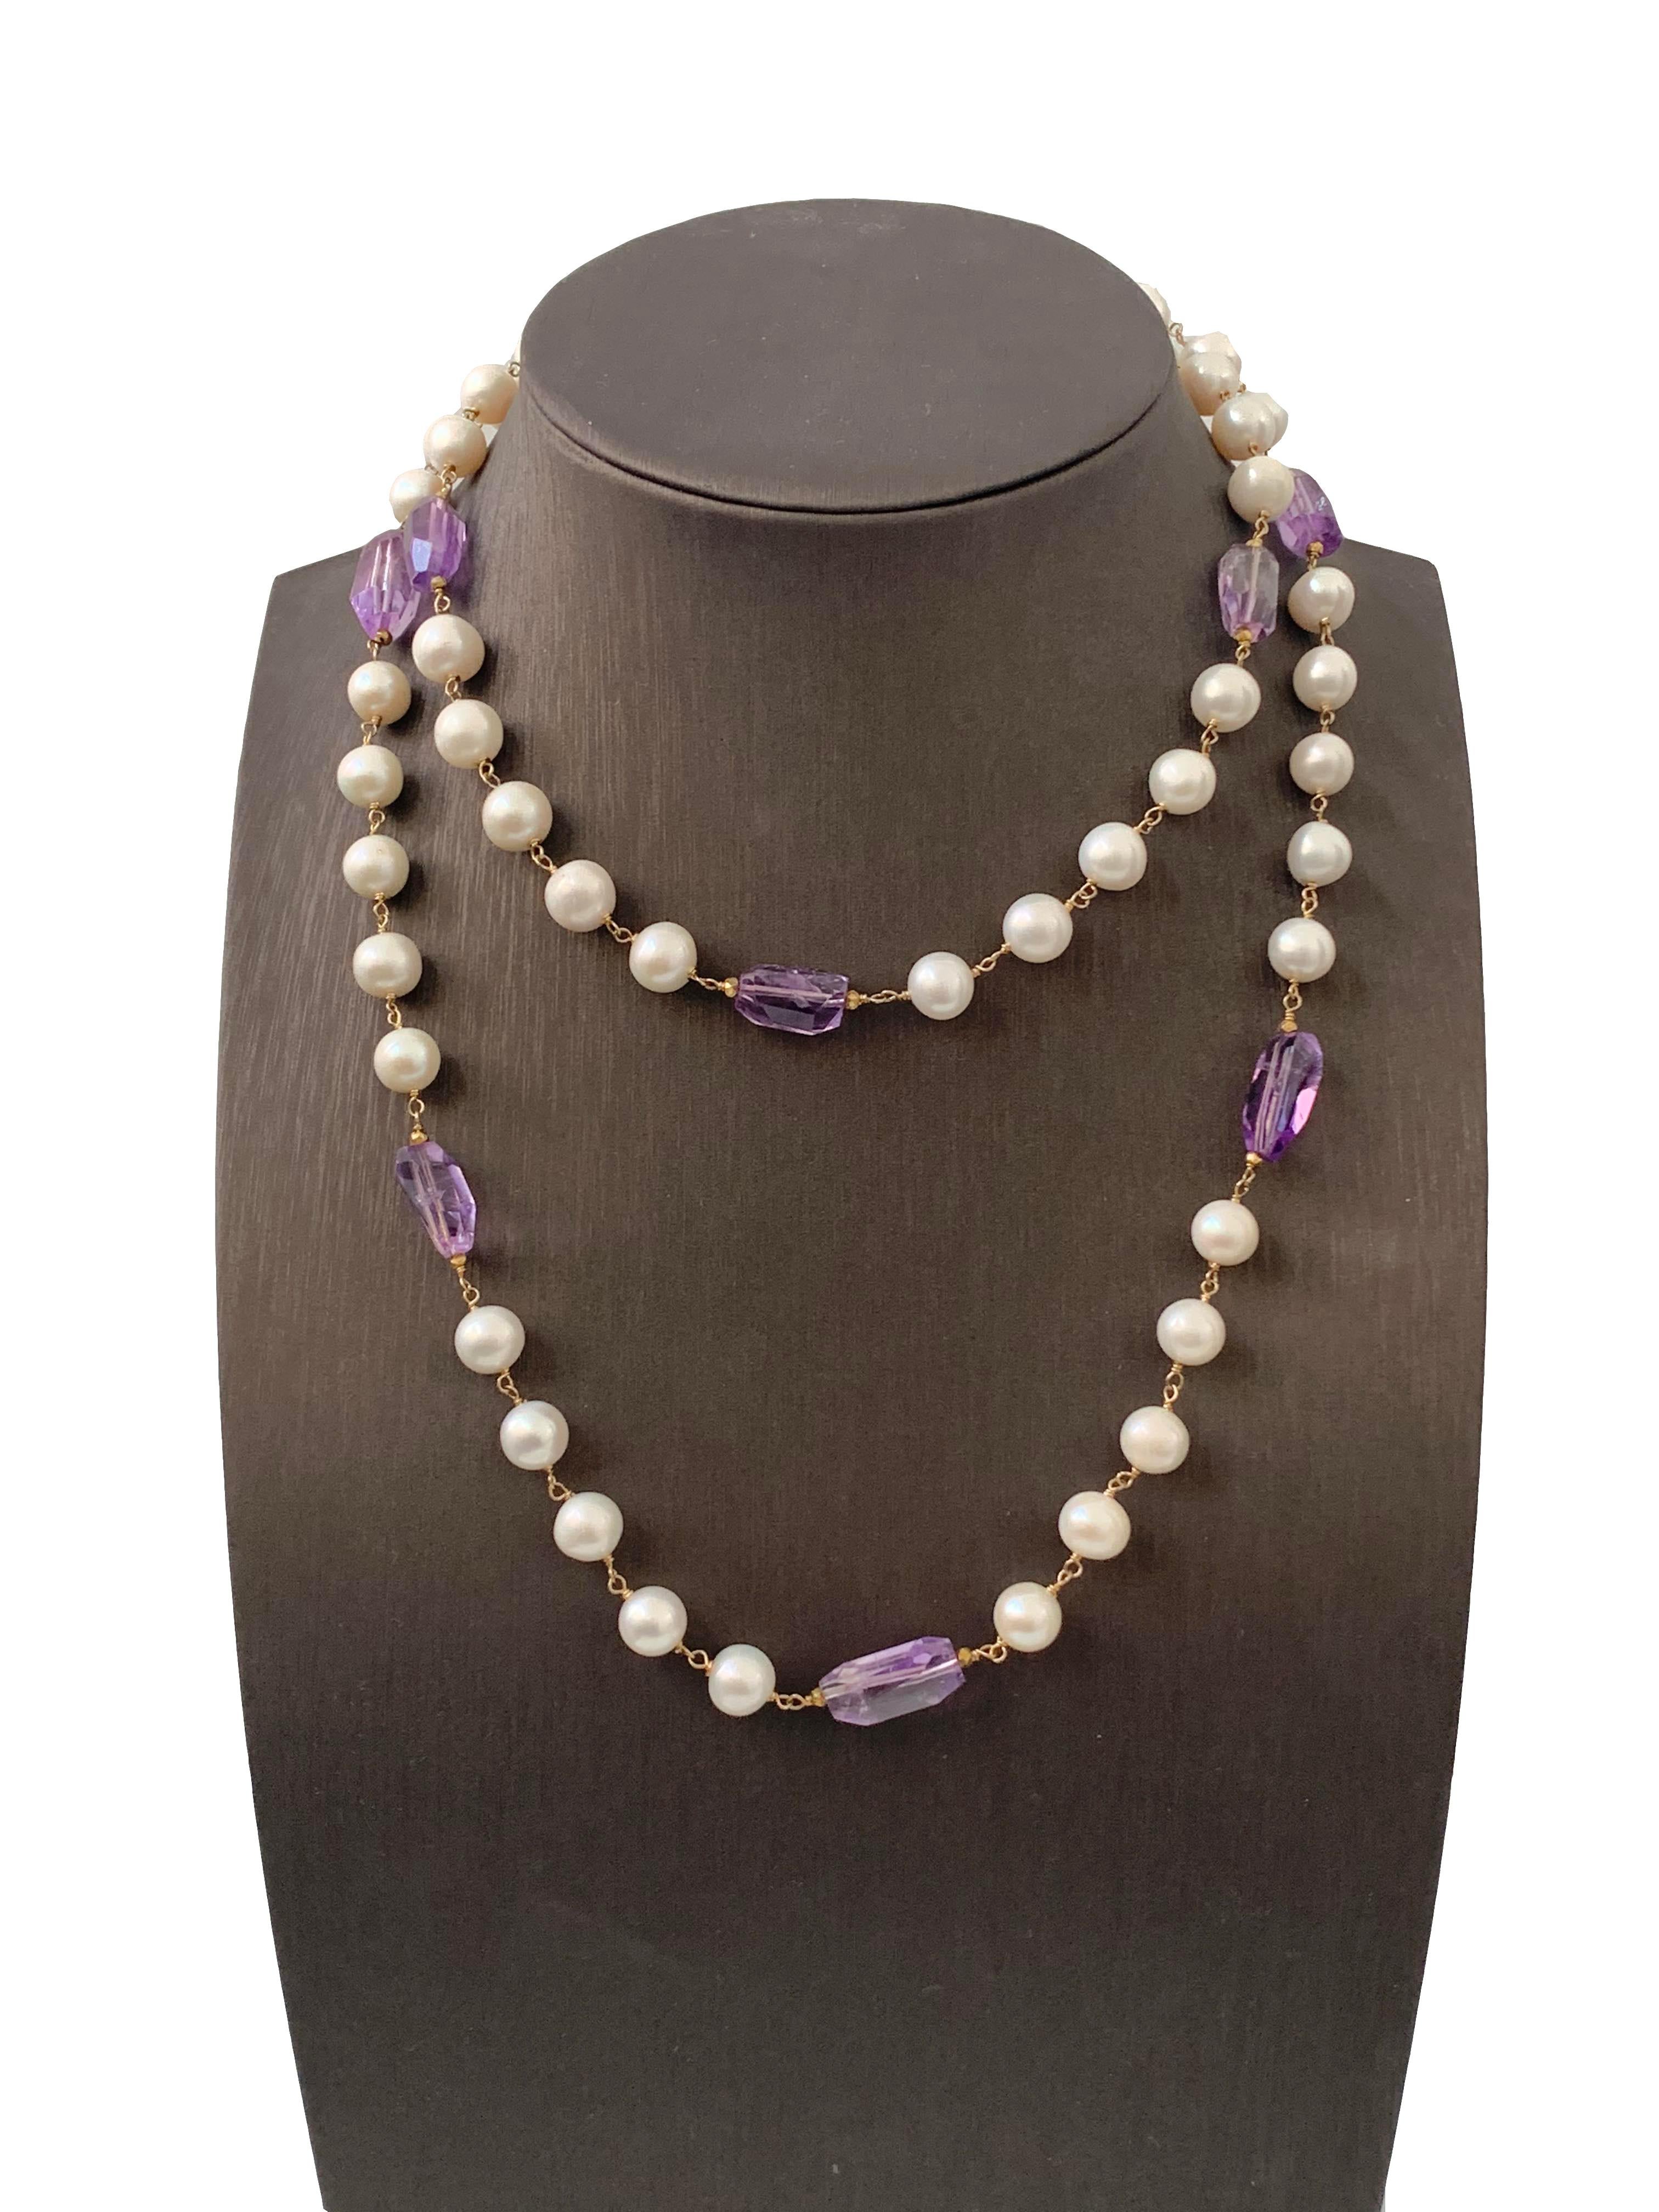 Long Genuine Faceted Amethyst and Cultured Pearl Necklace 43